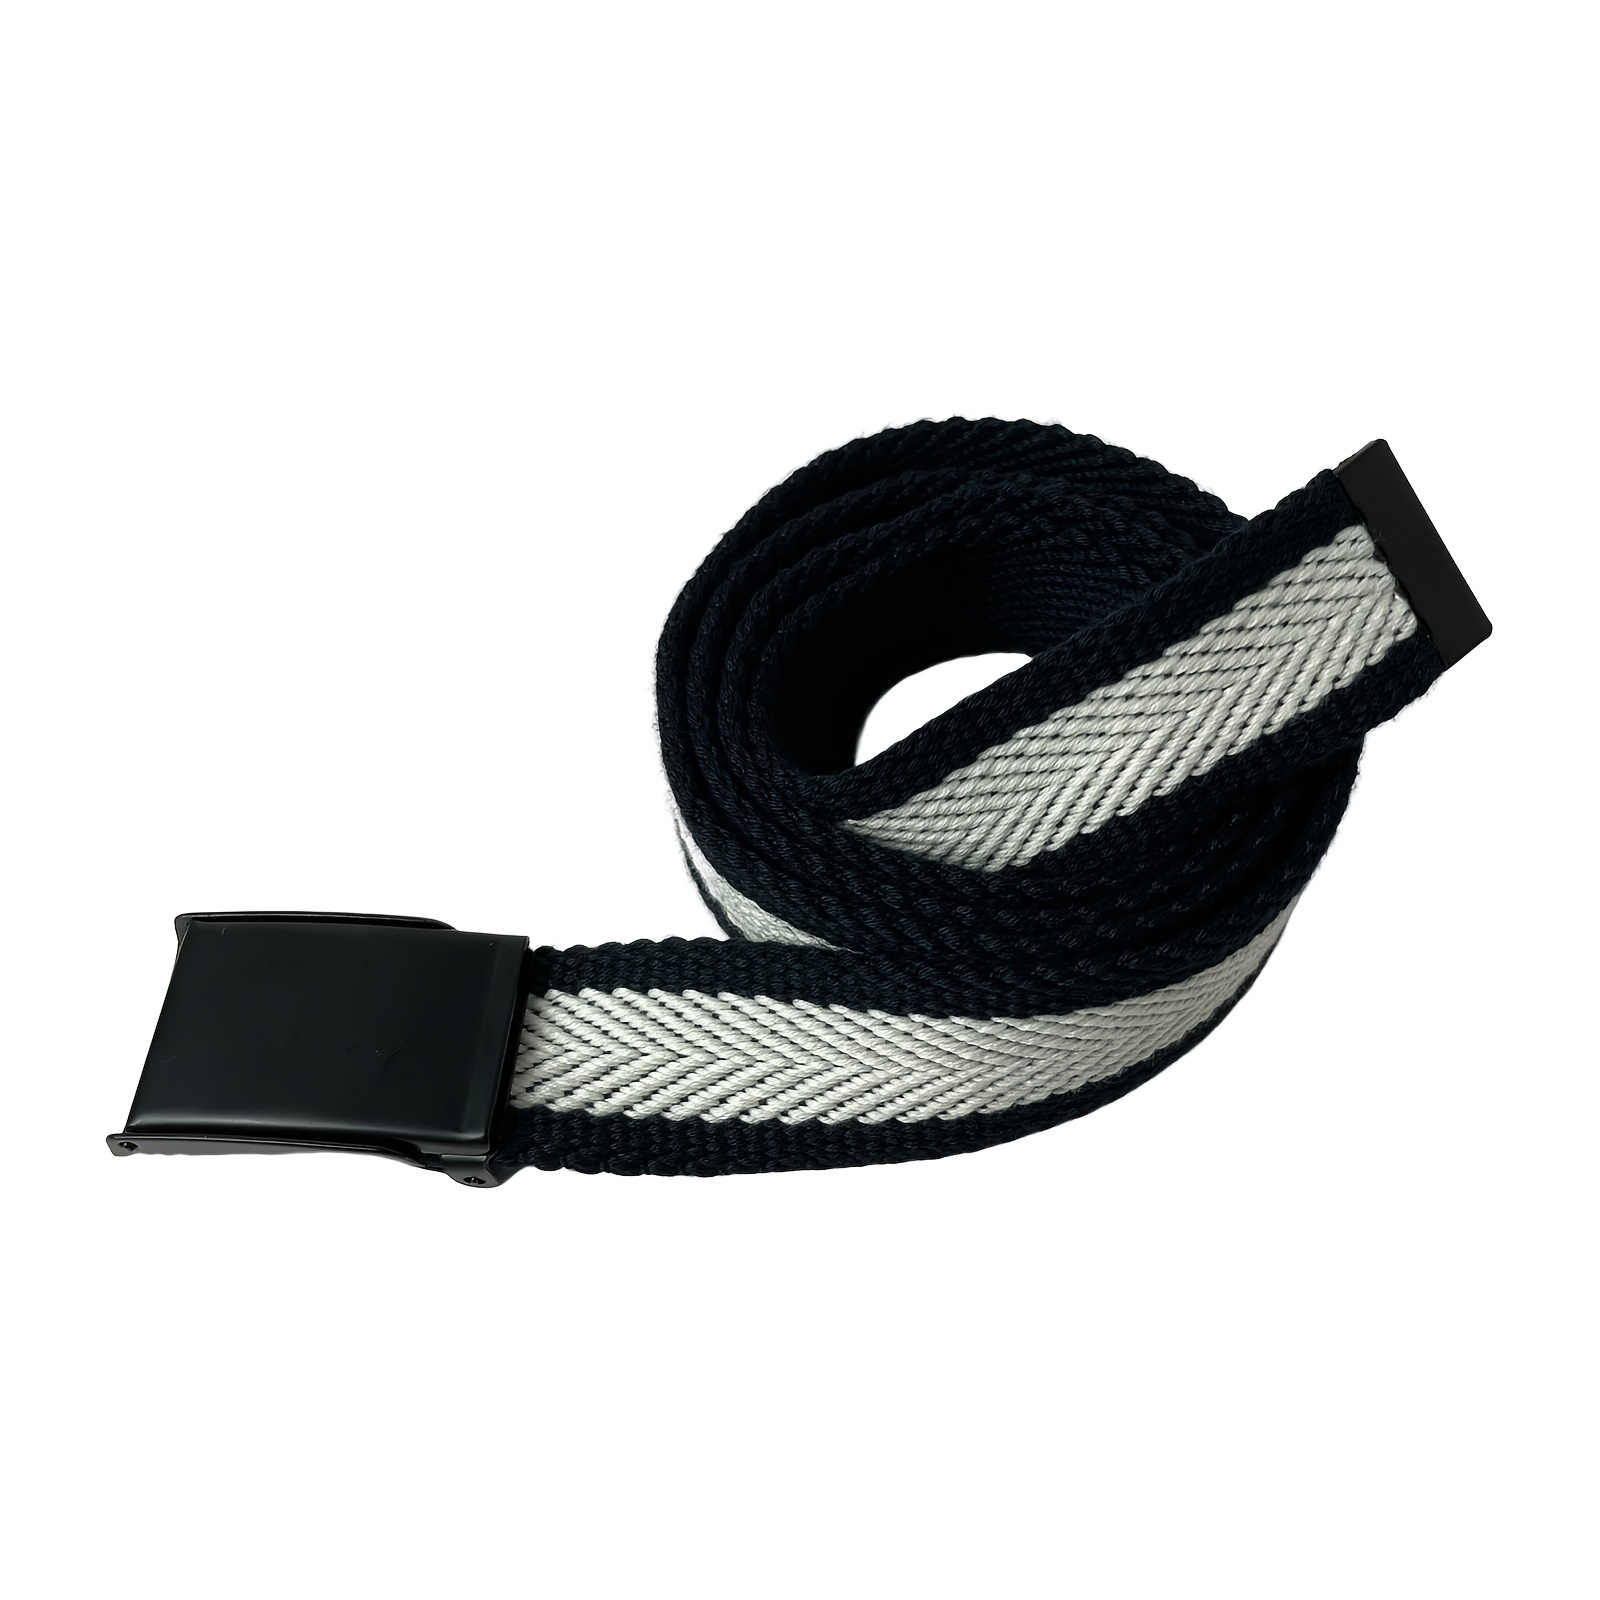 1pc Women's Black Pu Belt, Casual, Fitting With Jeans, Individuality,  Student Style